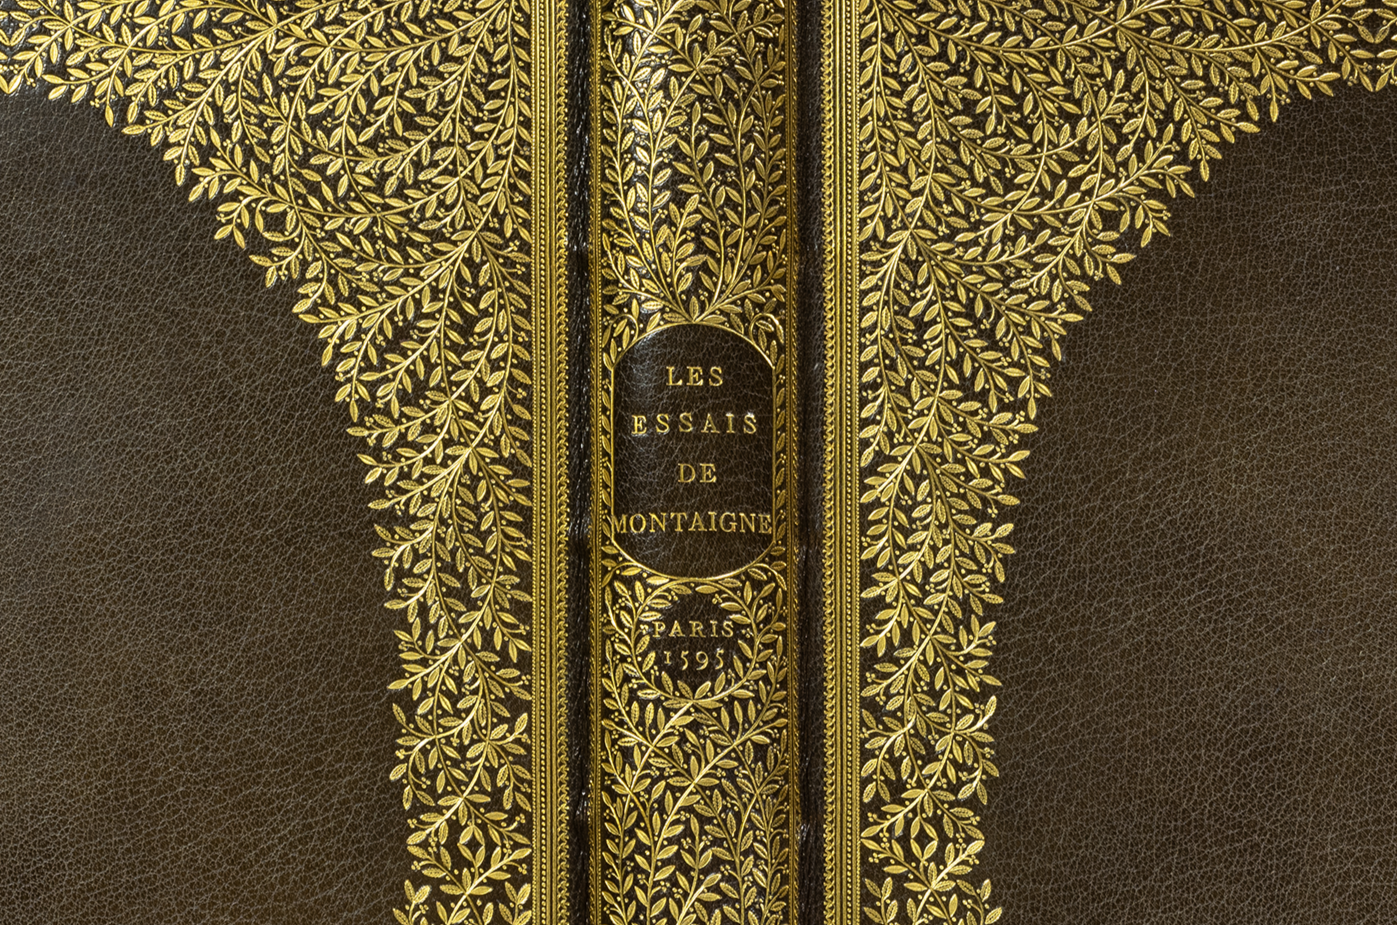 Montaigne-essais-1595-lortic-binding-reliure-olive-morocco-gilt-detail.png